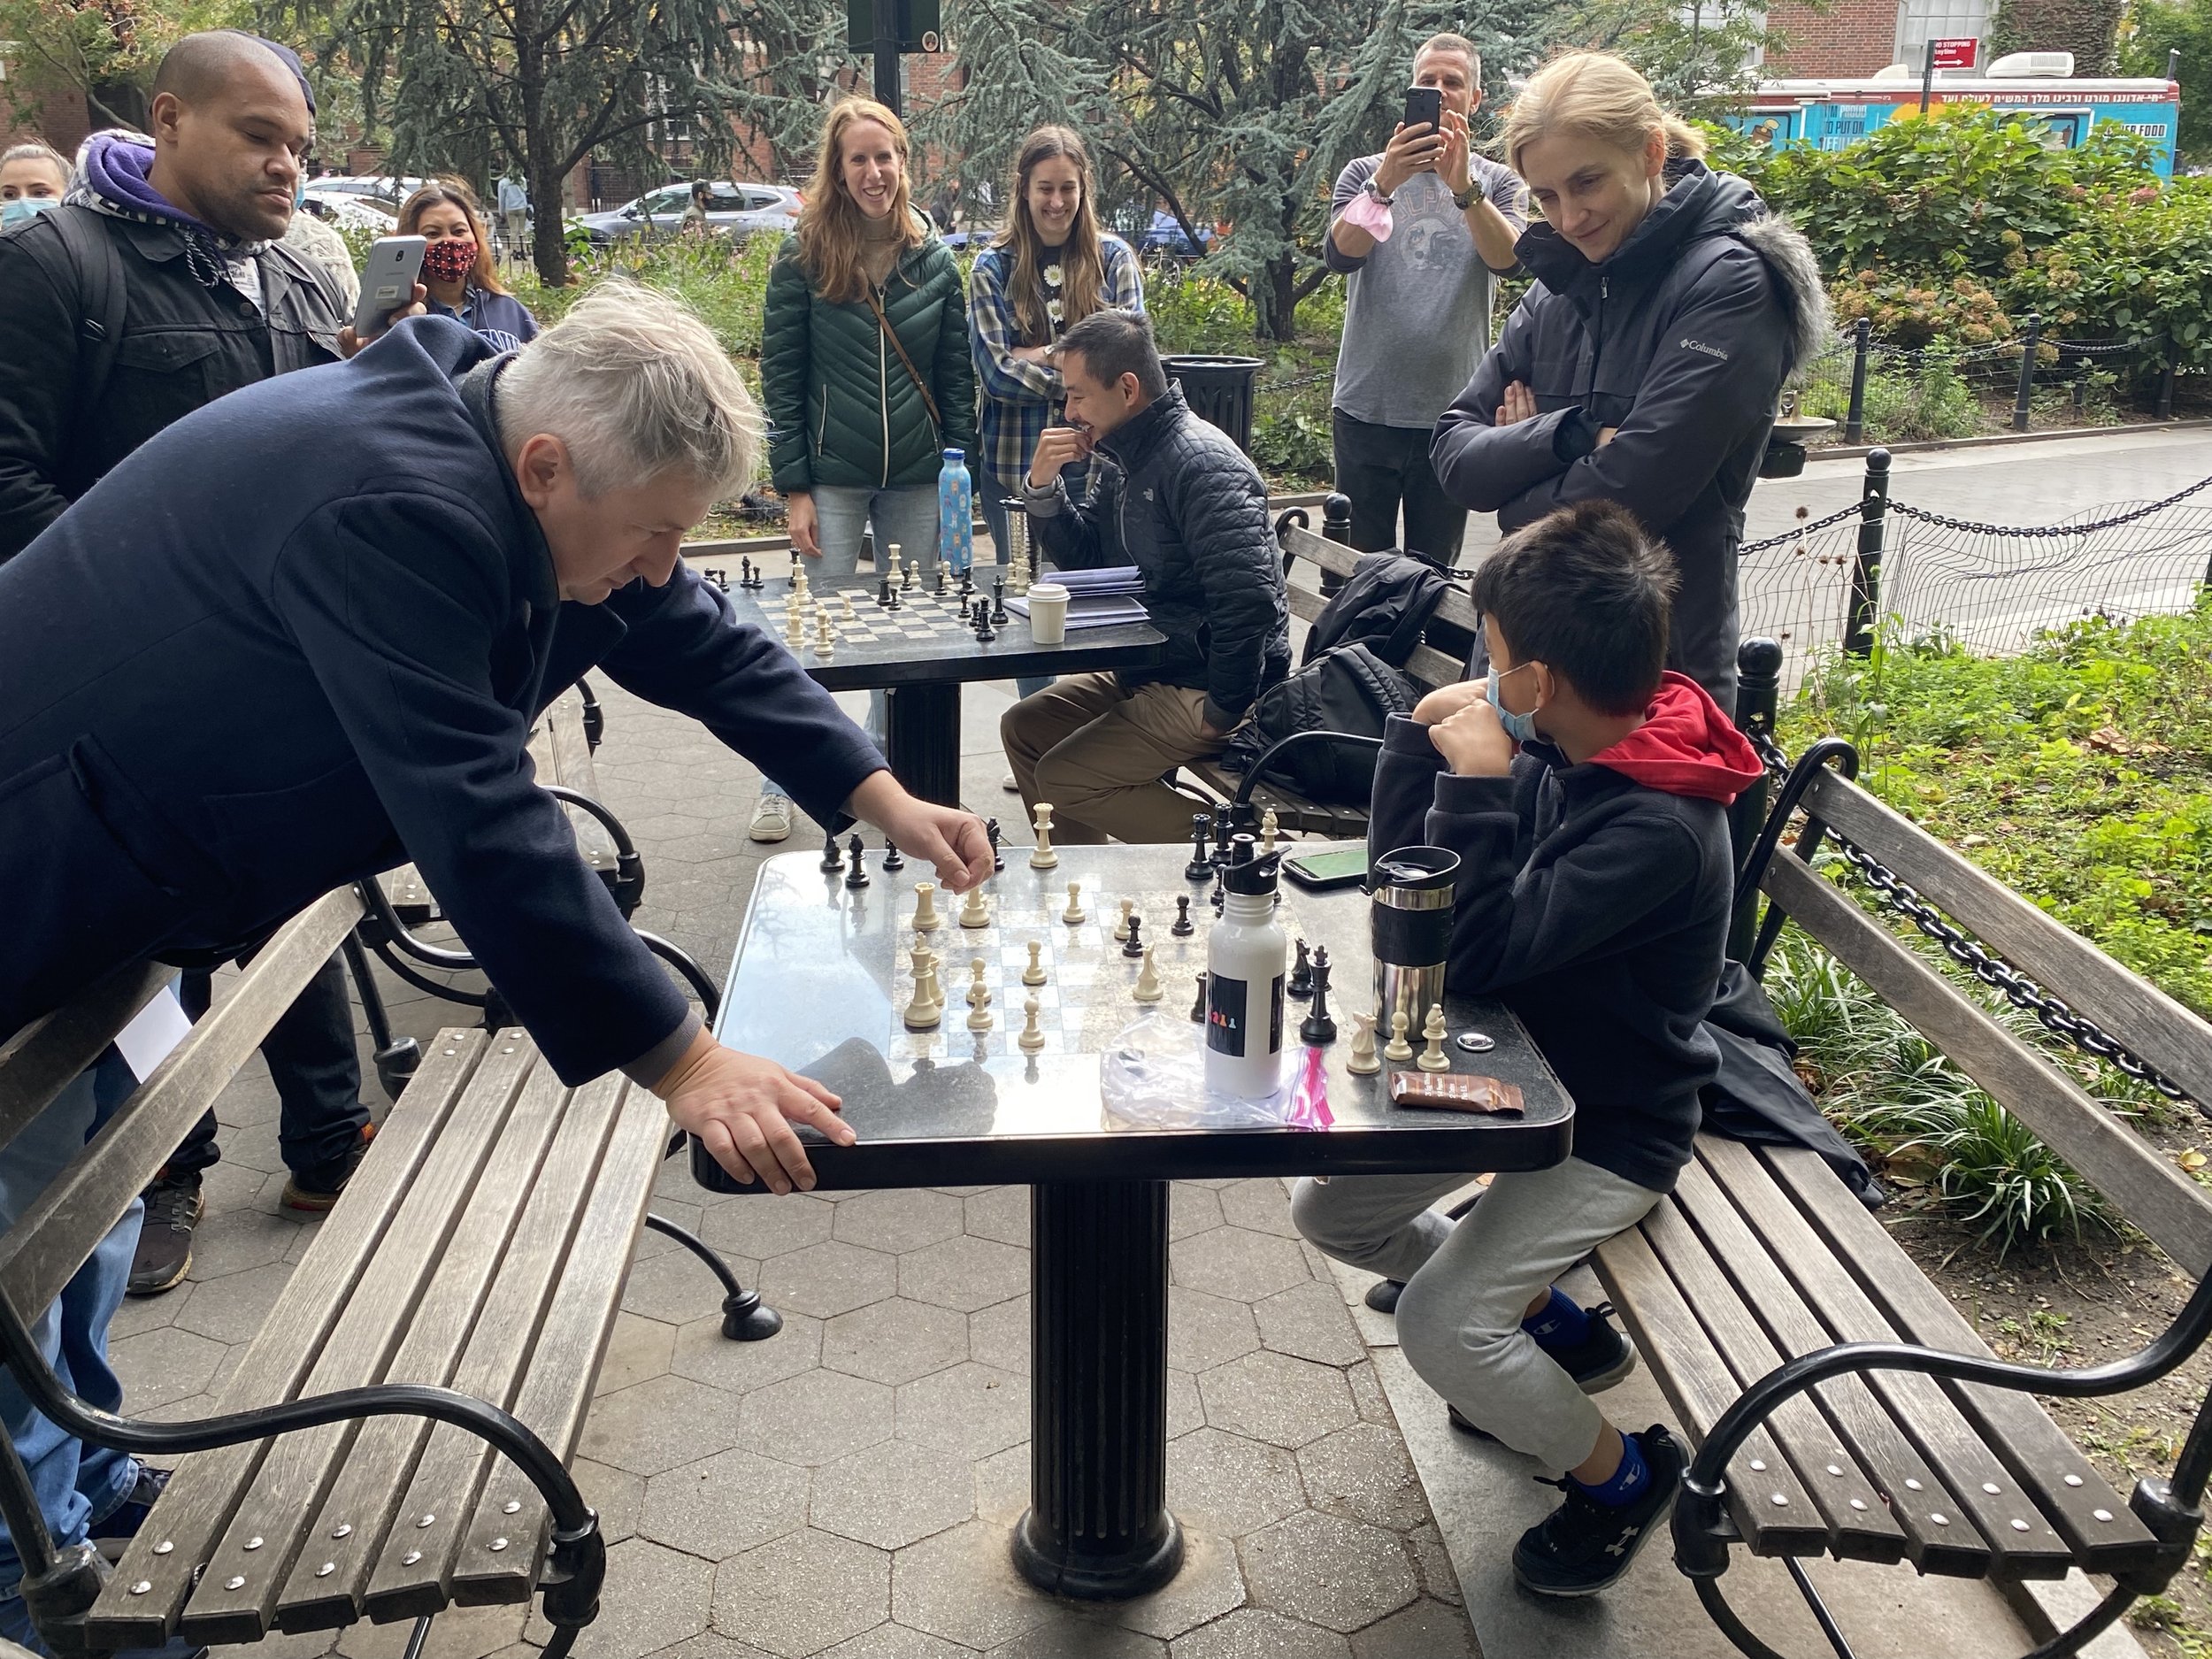 The Chess Academy – Grand Master Simul Challenge